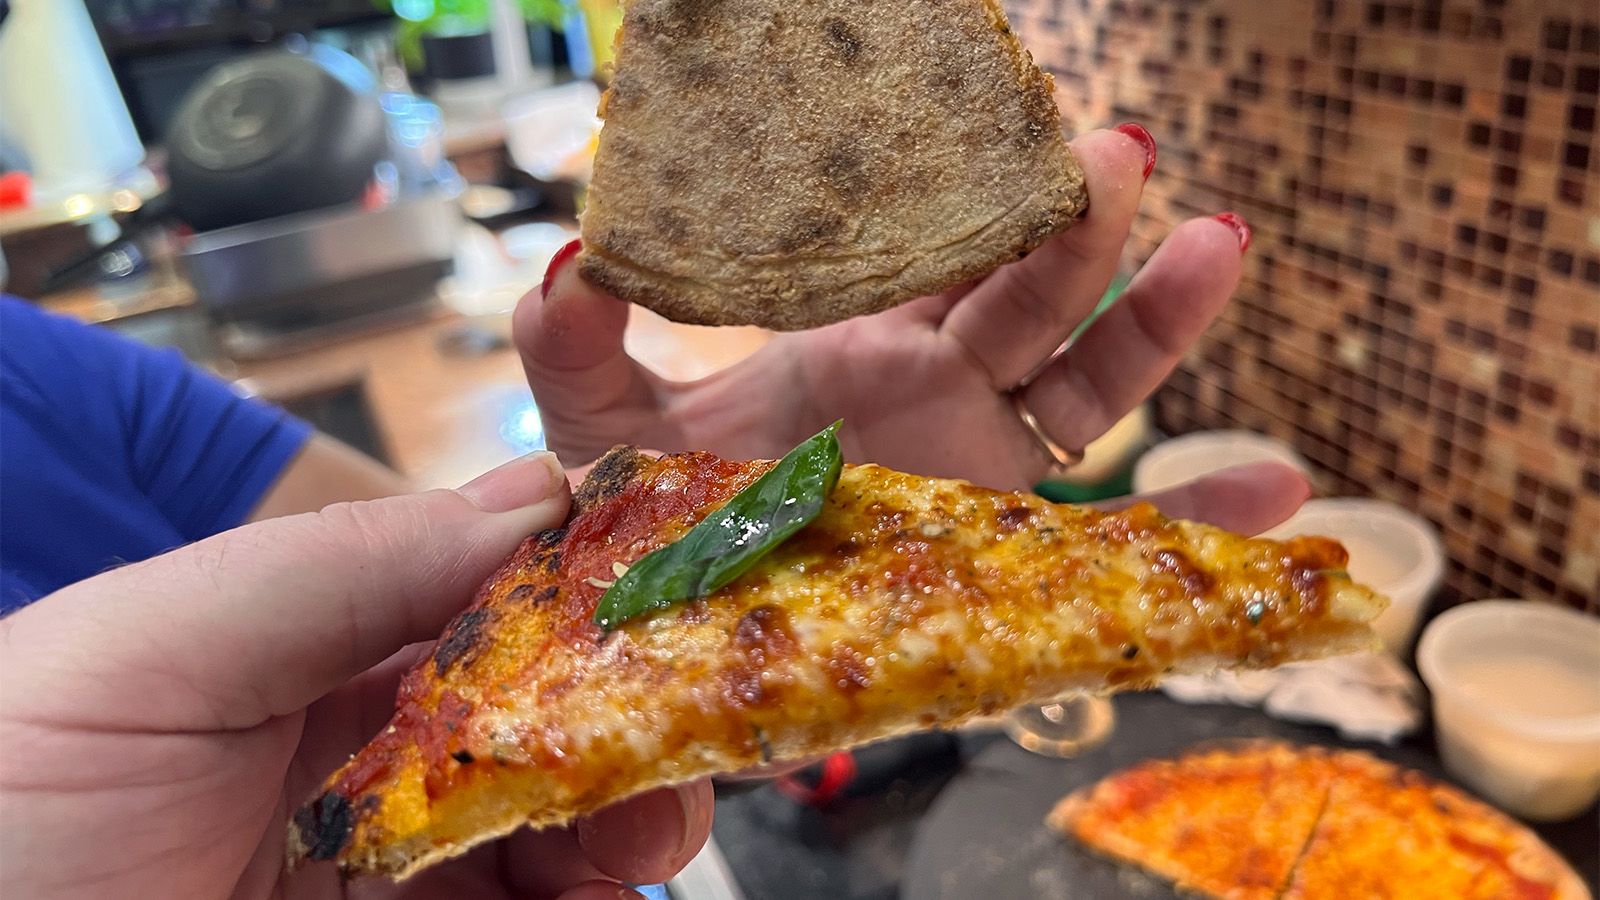 Ooni pizza oven review: These are the GHI's top-rated Ooni pizza ovens